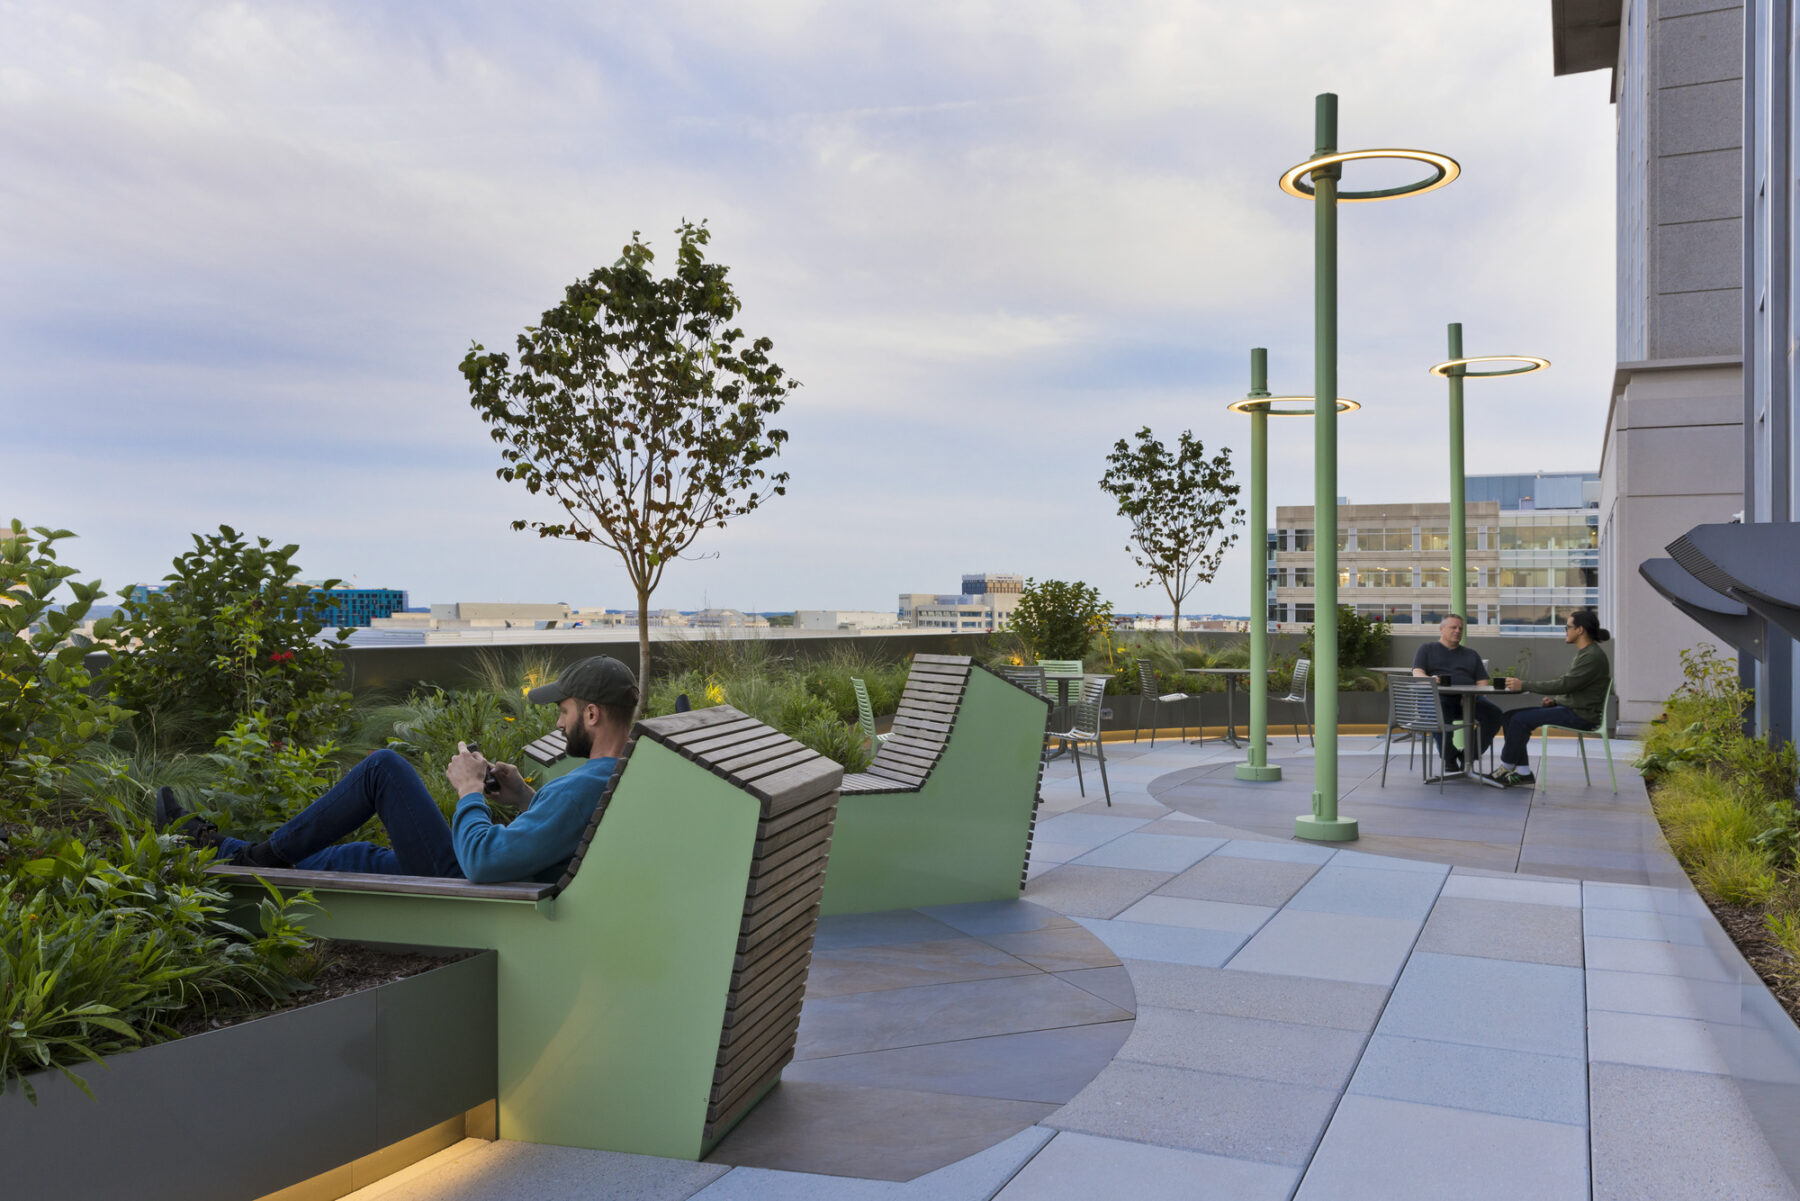 Roof terrace at dusk with custom reclining wooden benches and poles for hammocks